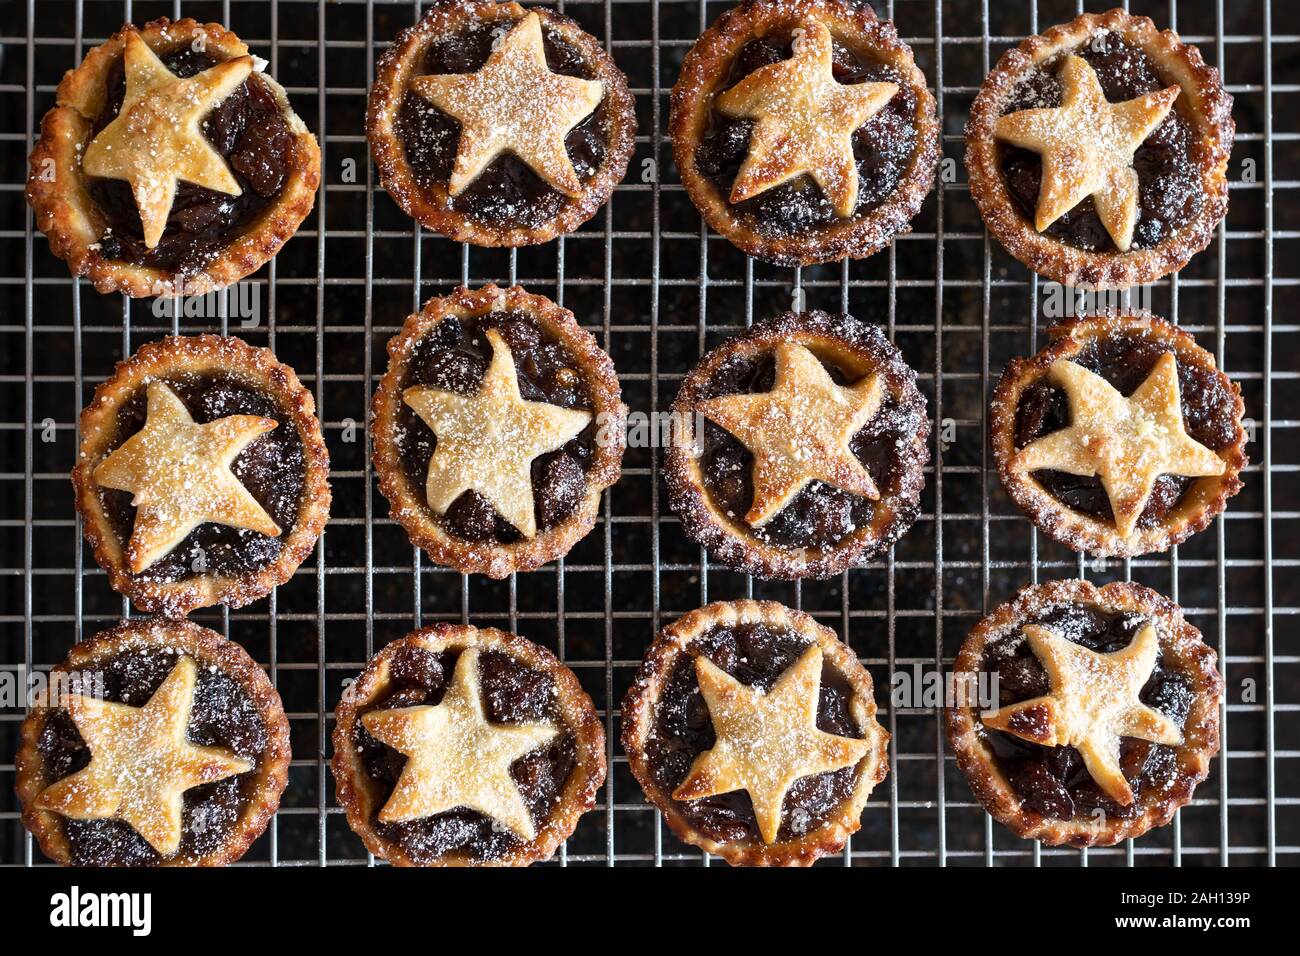 Homemade traditional mince pies on cooling rack Stock Photo